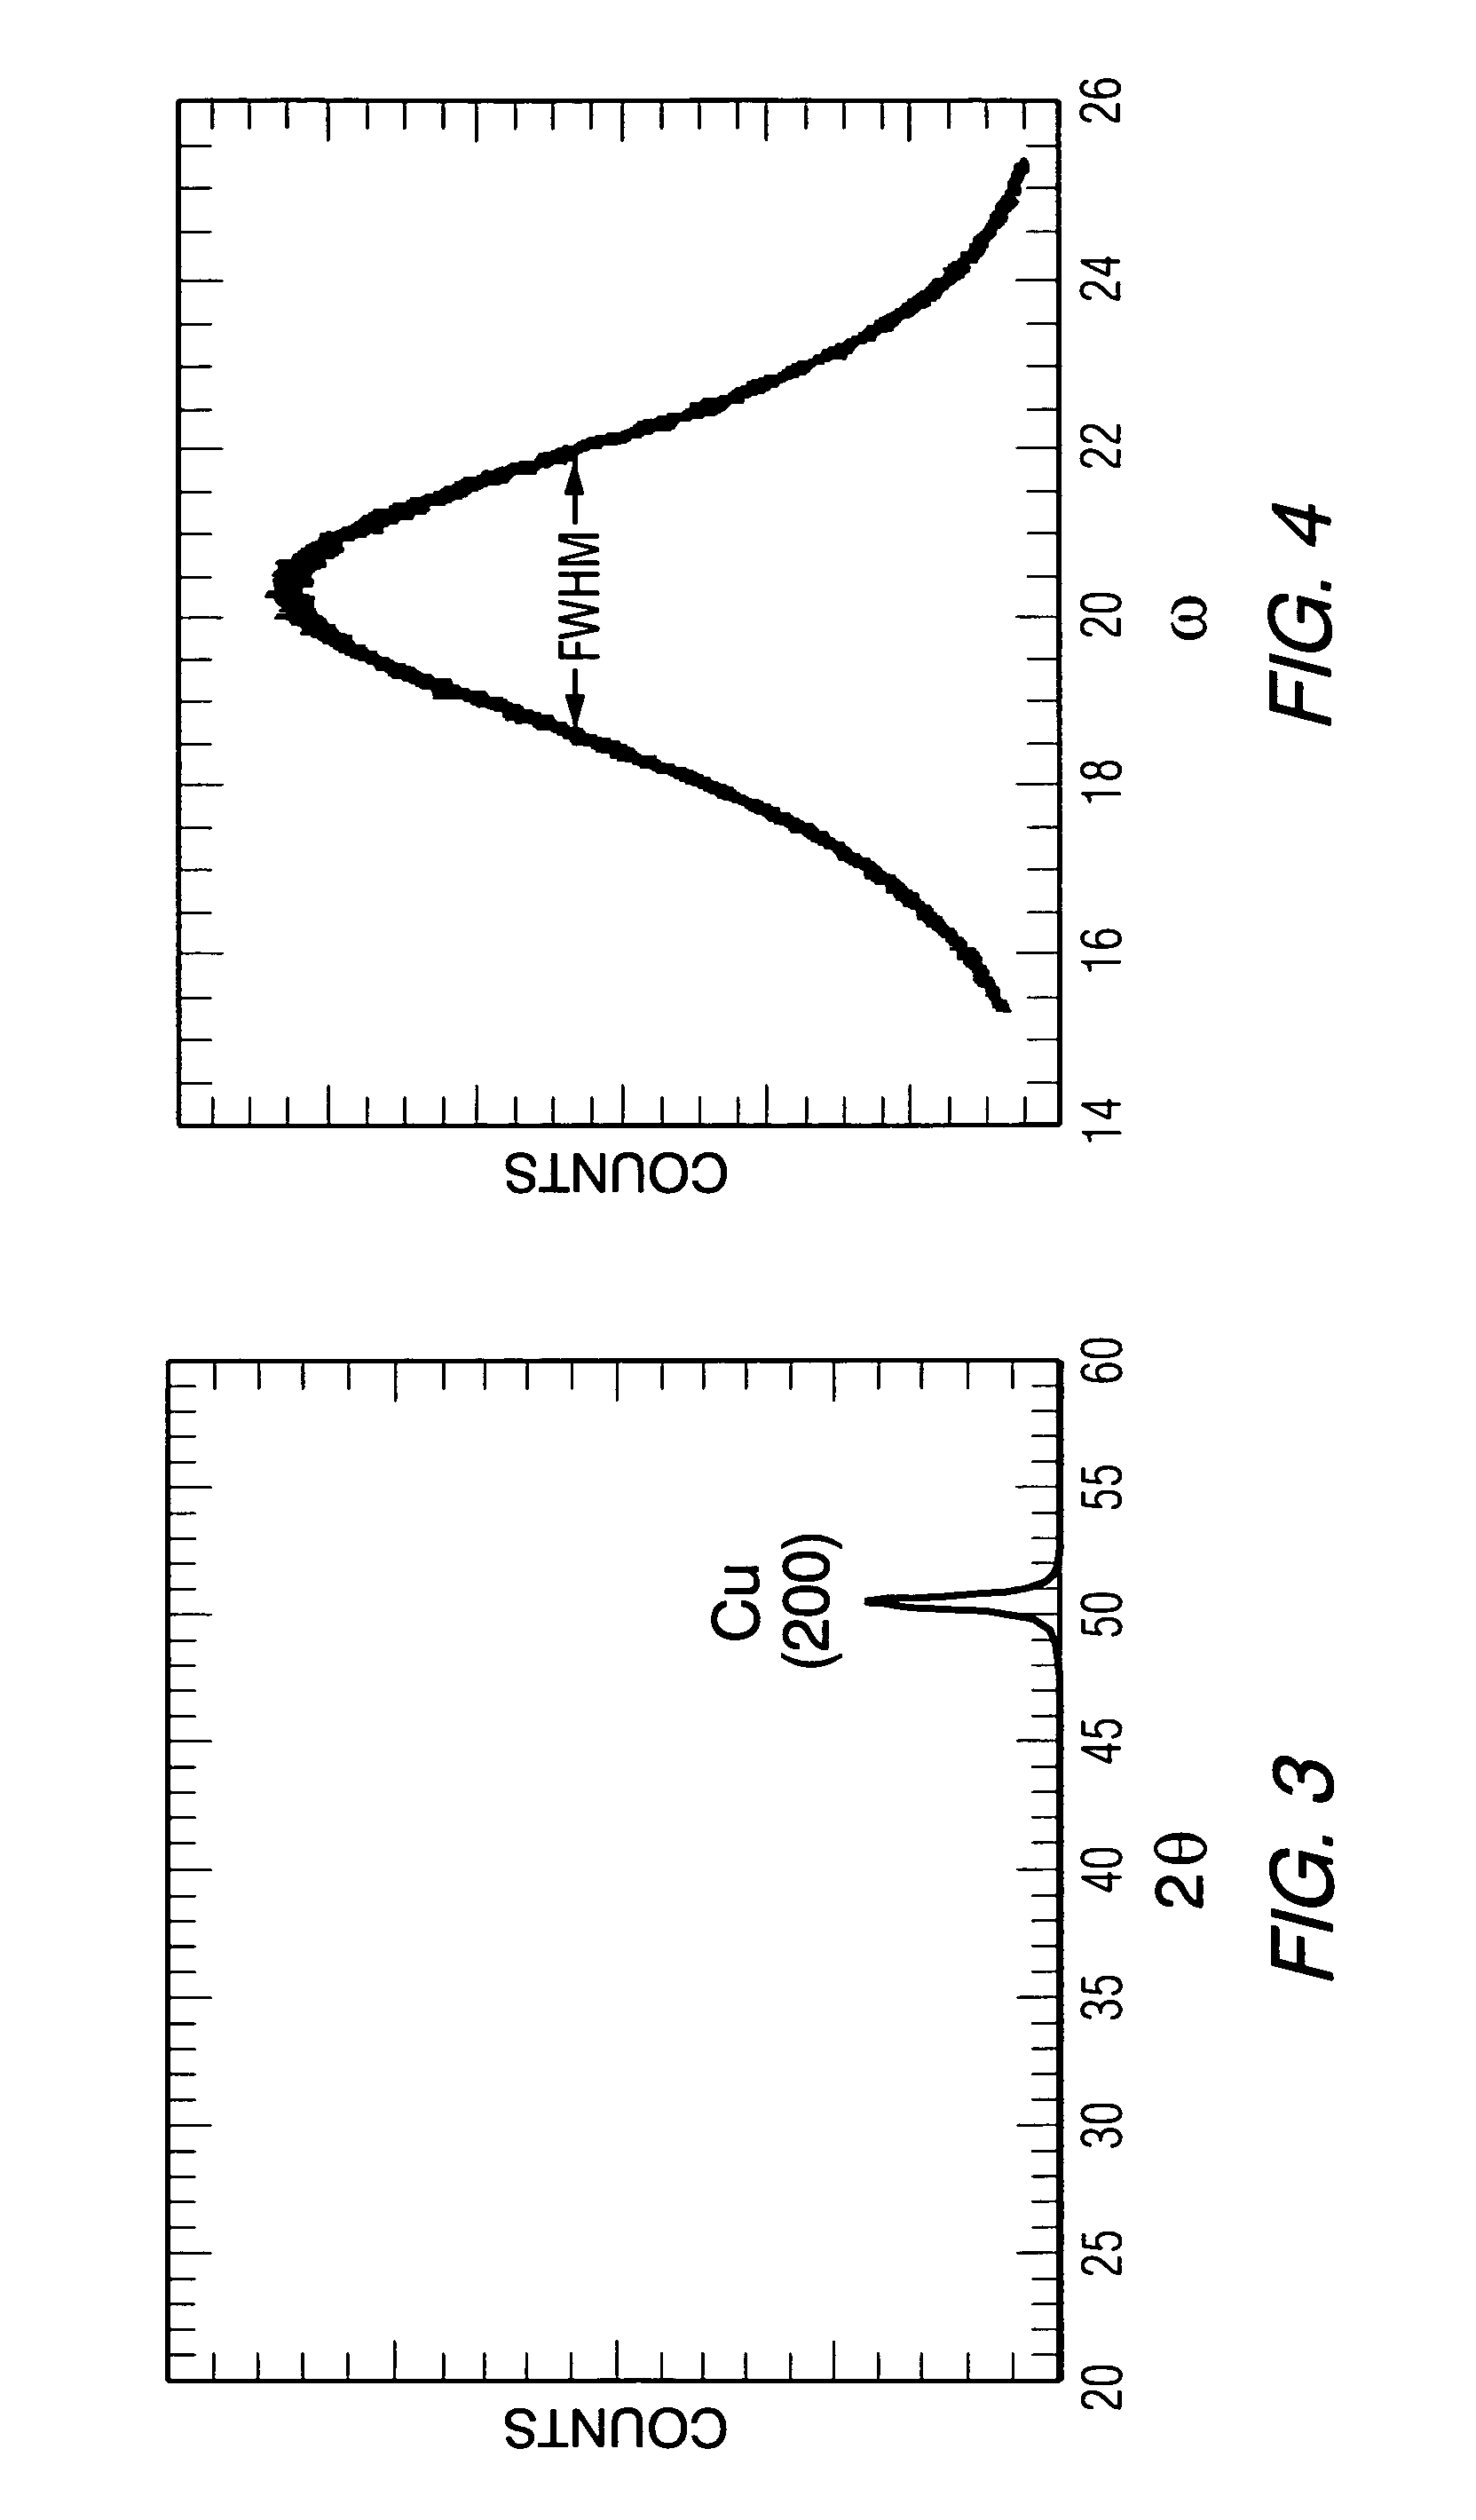 Epitaxial ferroelectric and magnetic recording structures including graded lattice matching layers